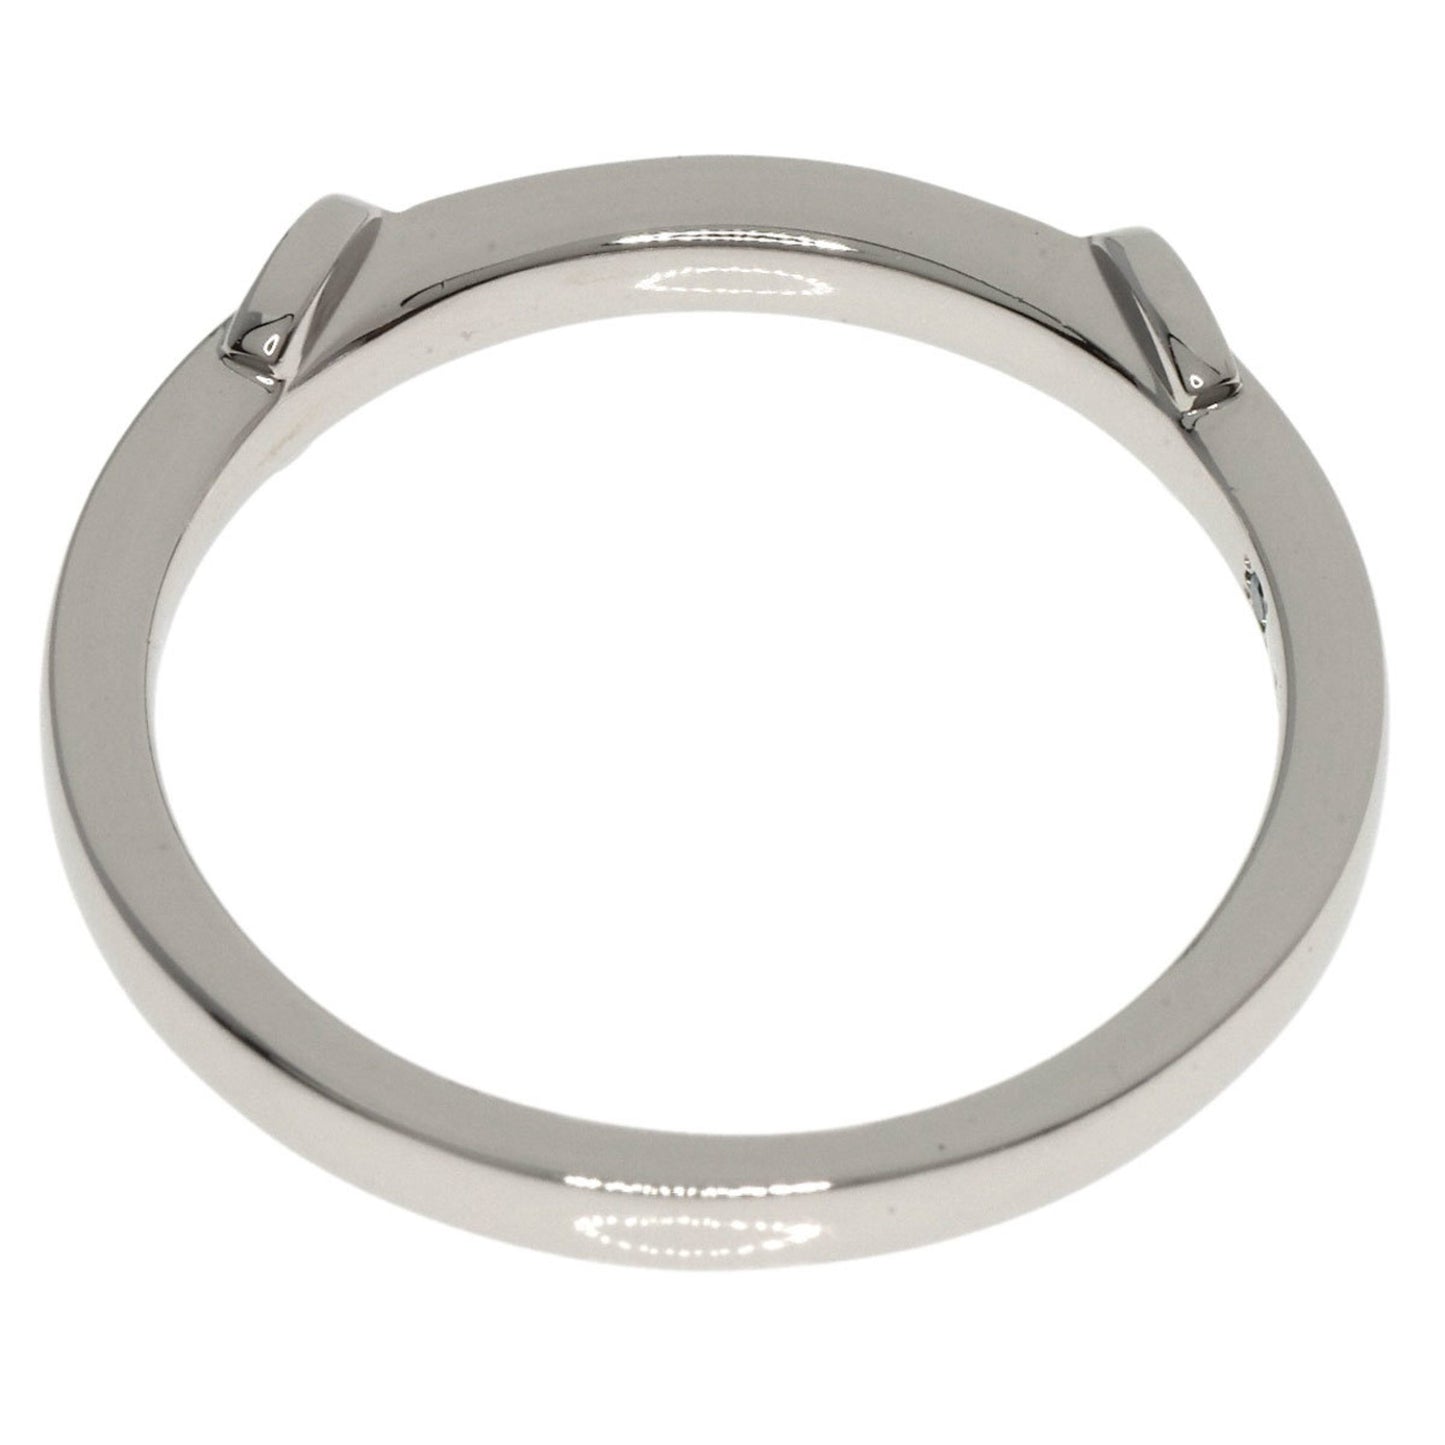 Celine Women's Platinum Band-Style Ring in Silver